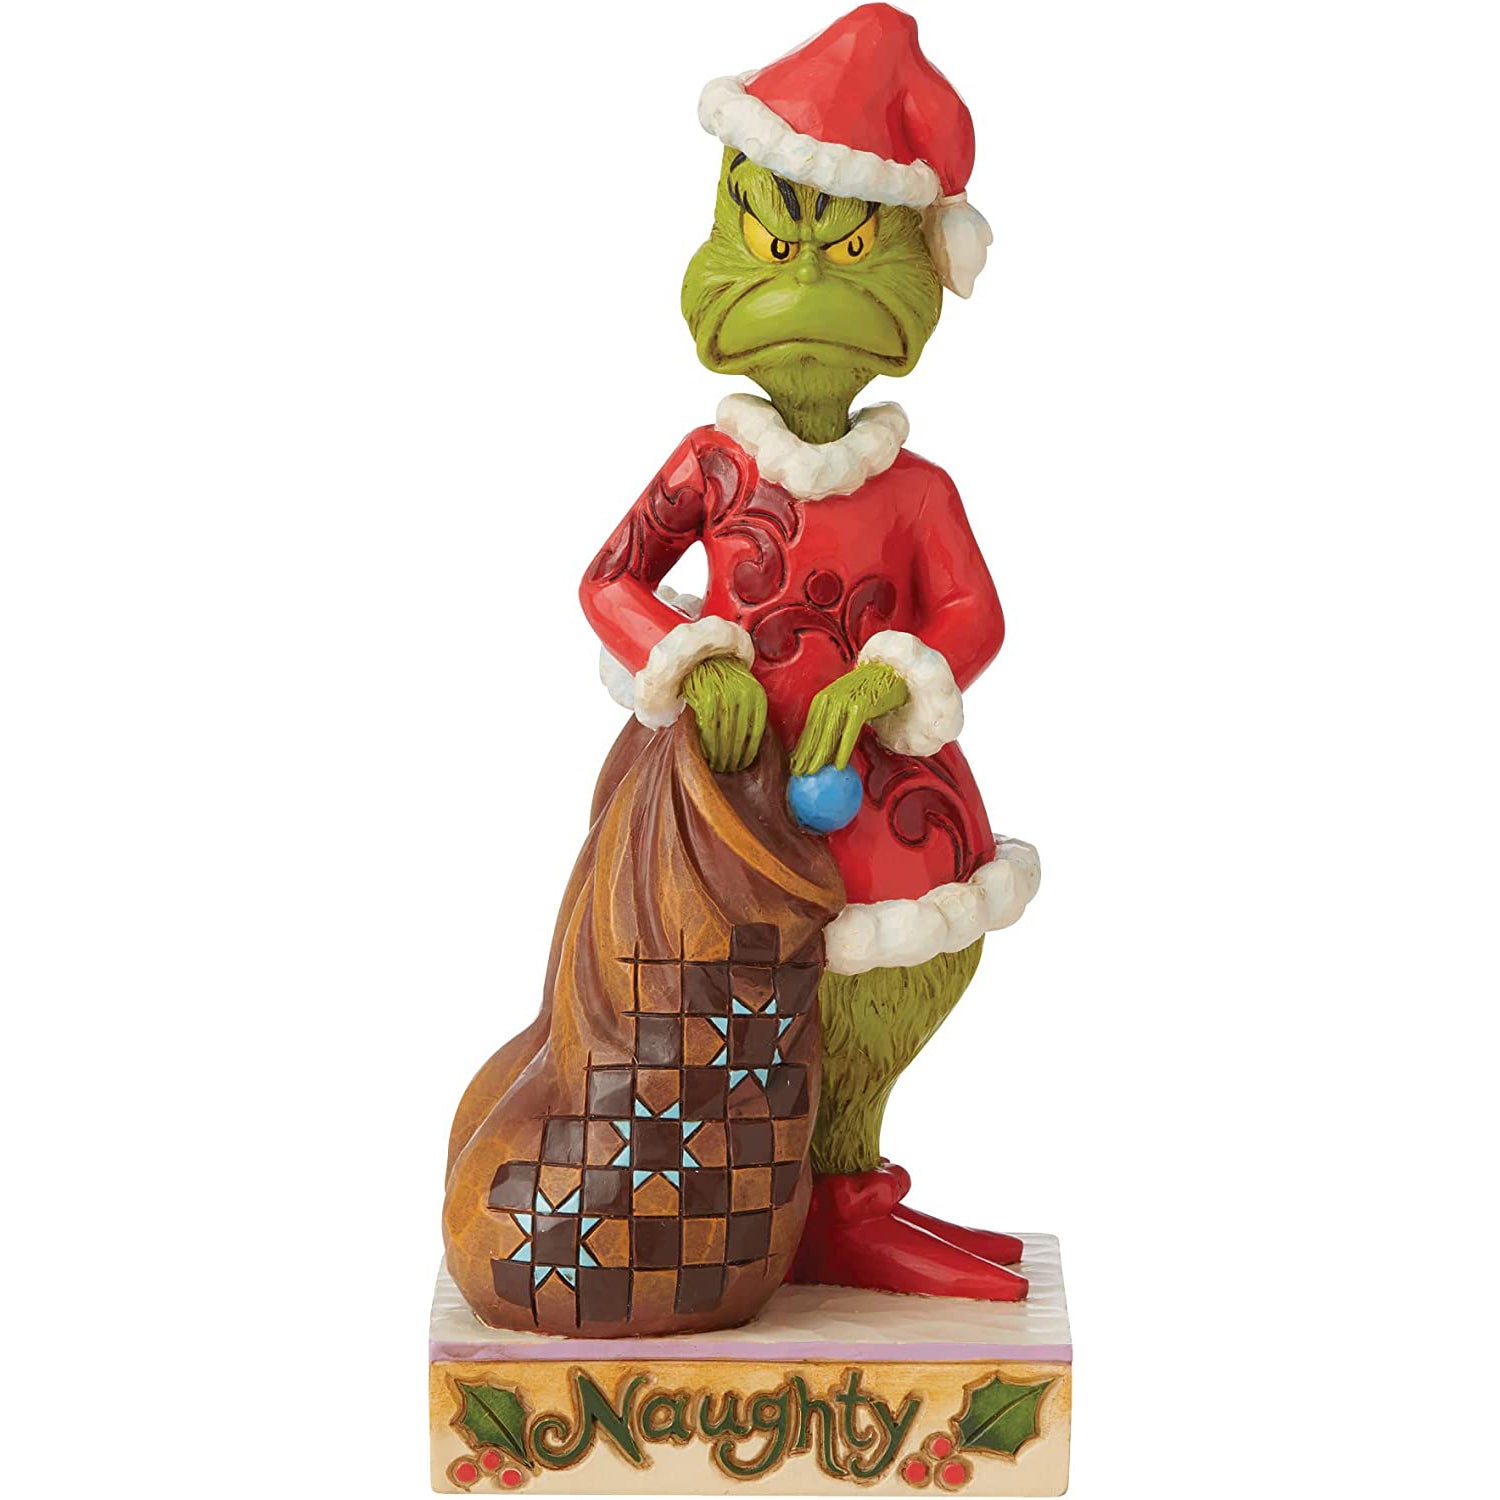 Grinch Naughty/Nice Figure by Jim Shore